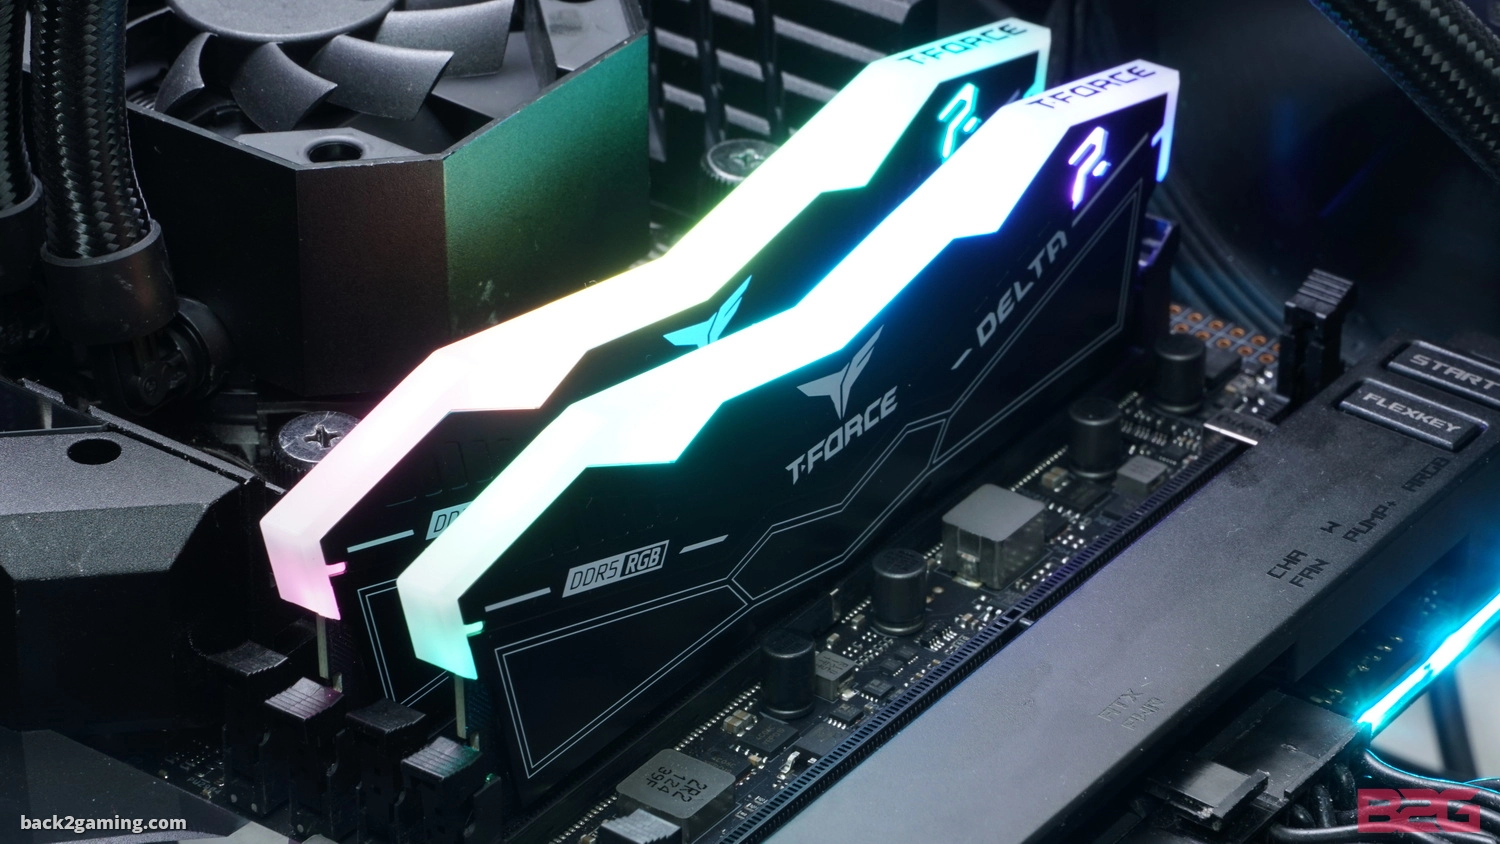 T-Force Delta Rgb Ddr5-6200 32Gb Memory Kit Review